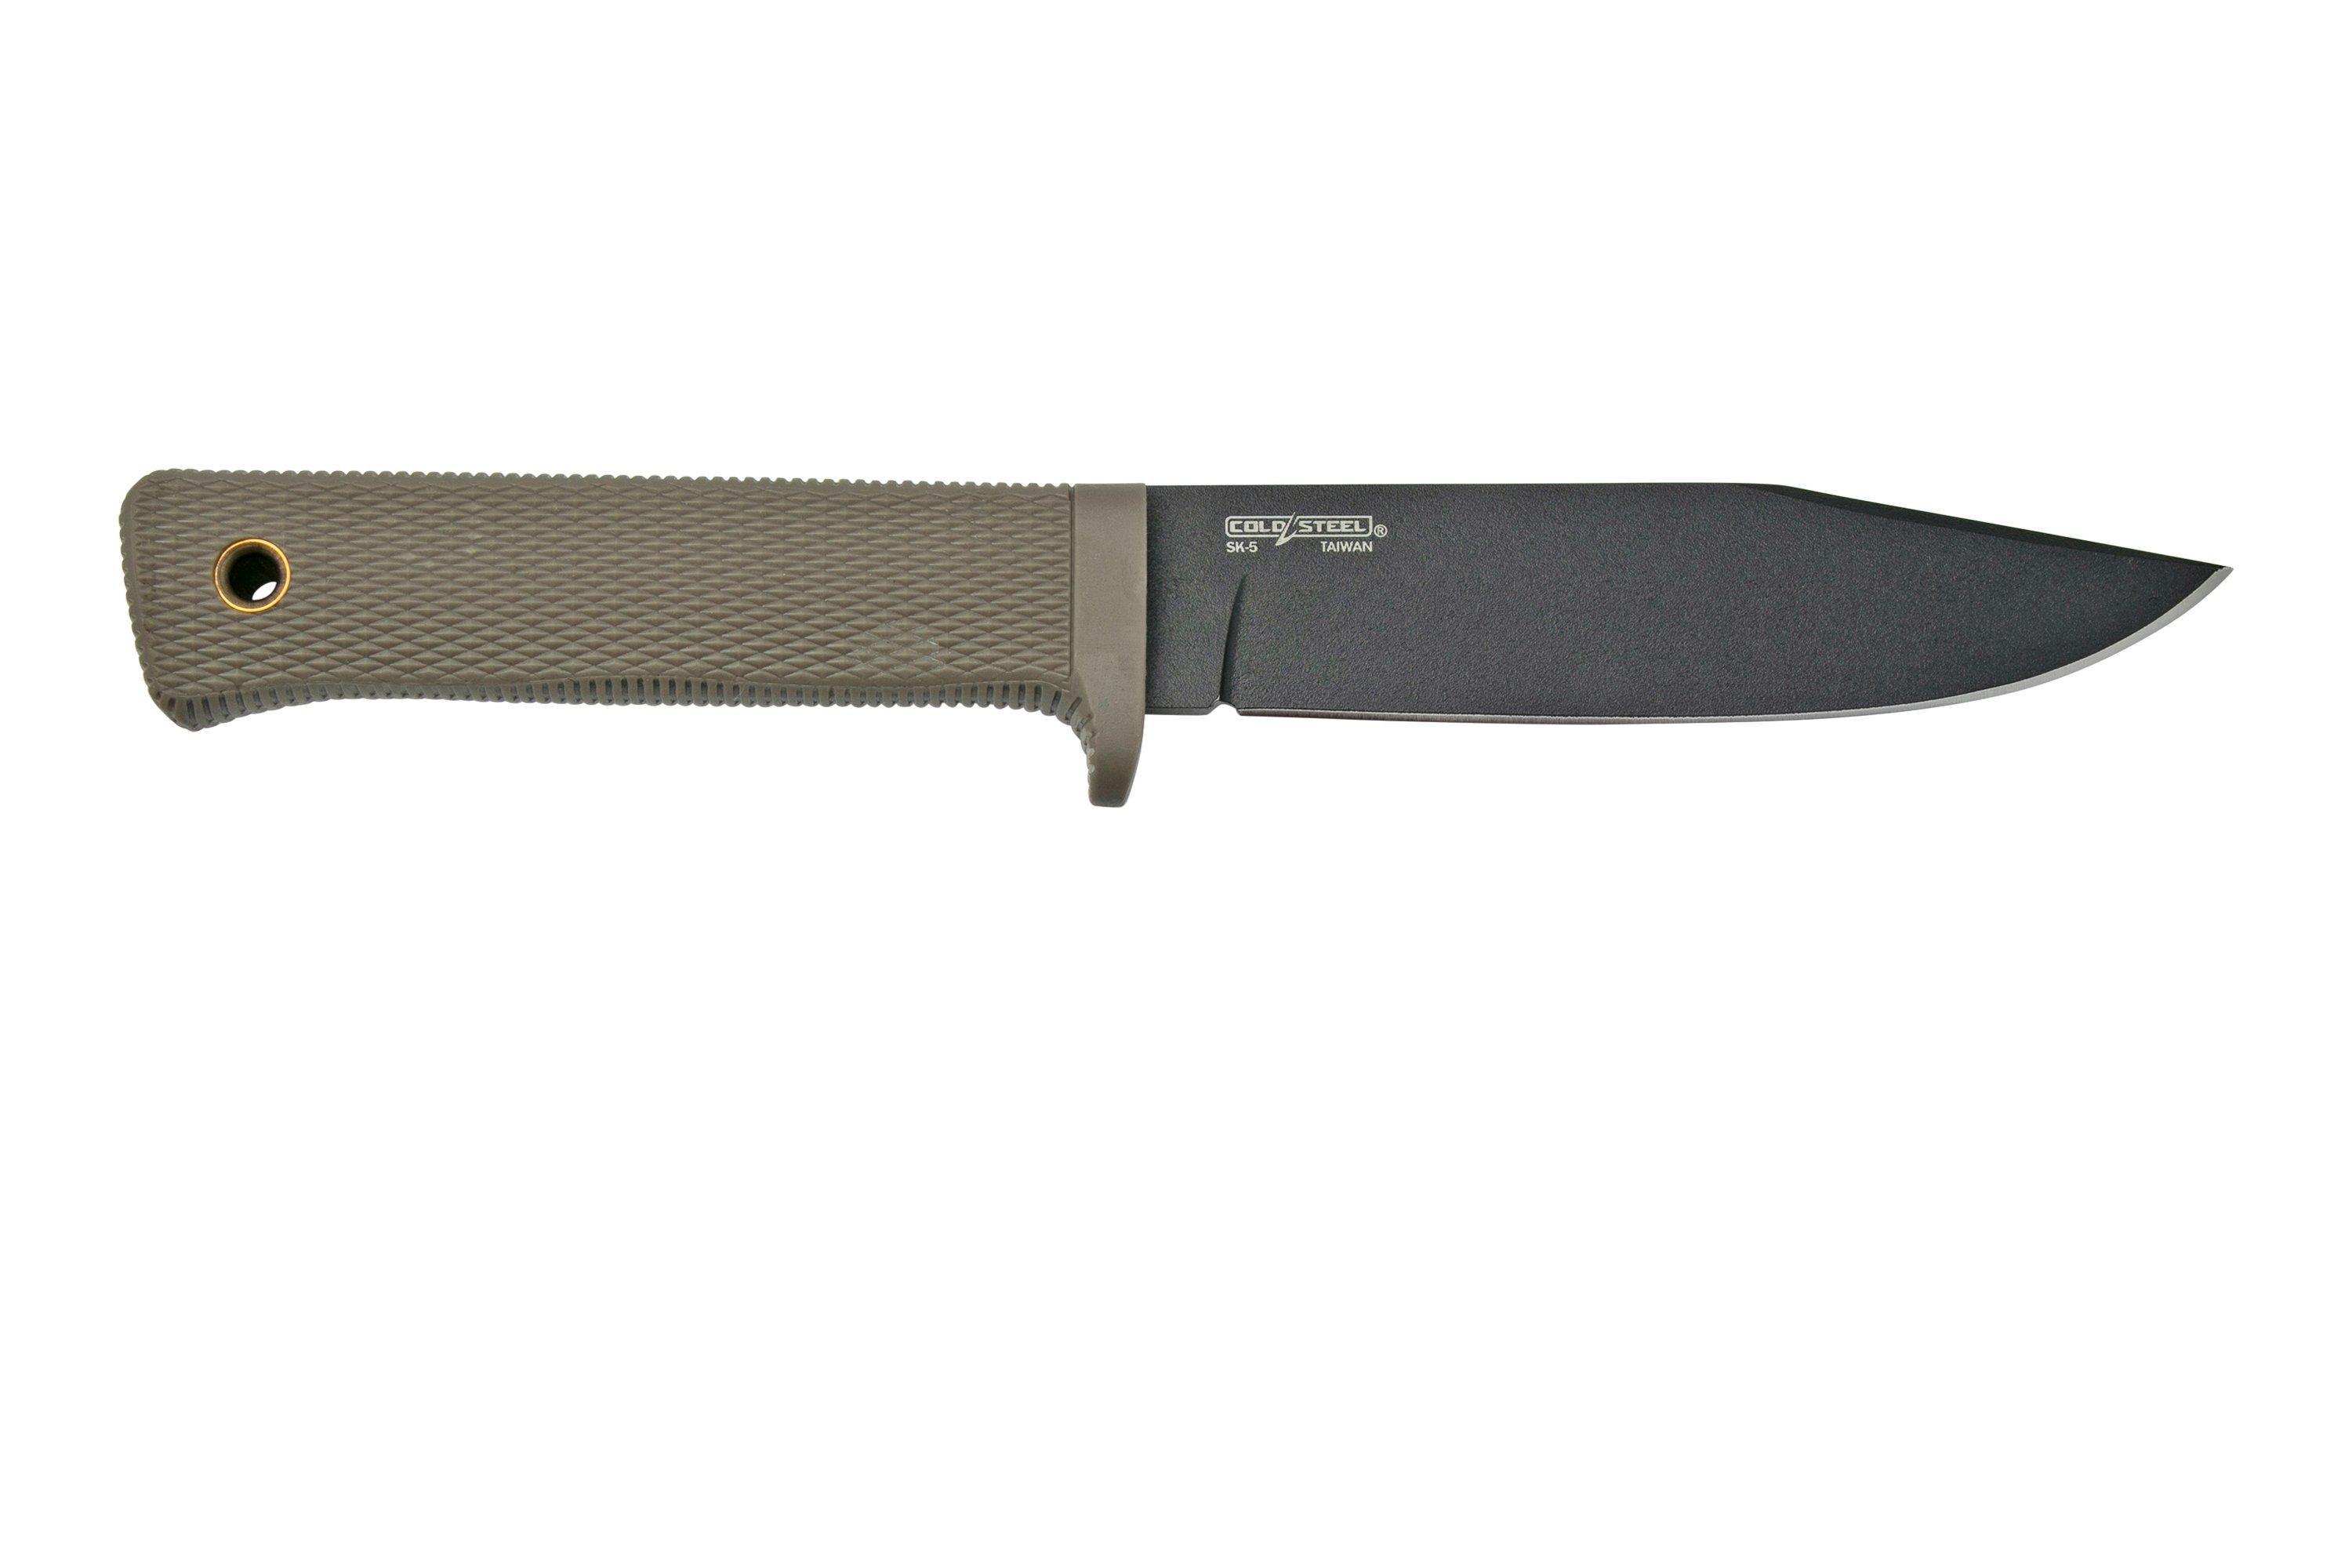 cold-steel-srk-compact-49lckddebk-dark-earth-survival-knife-advantageously-shopping-at